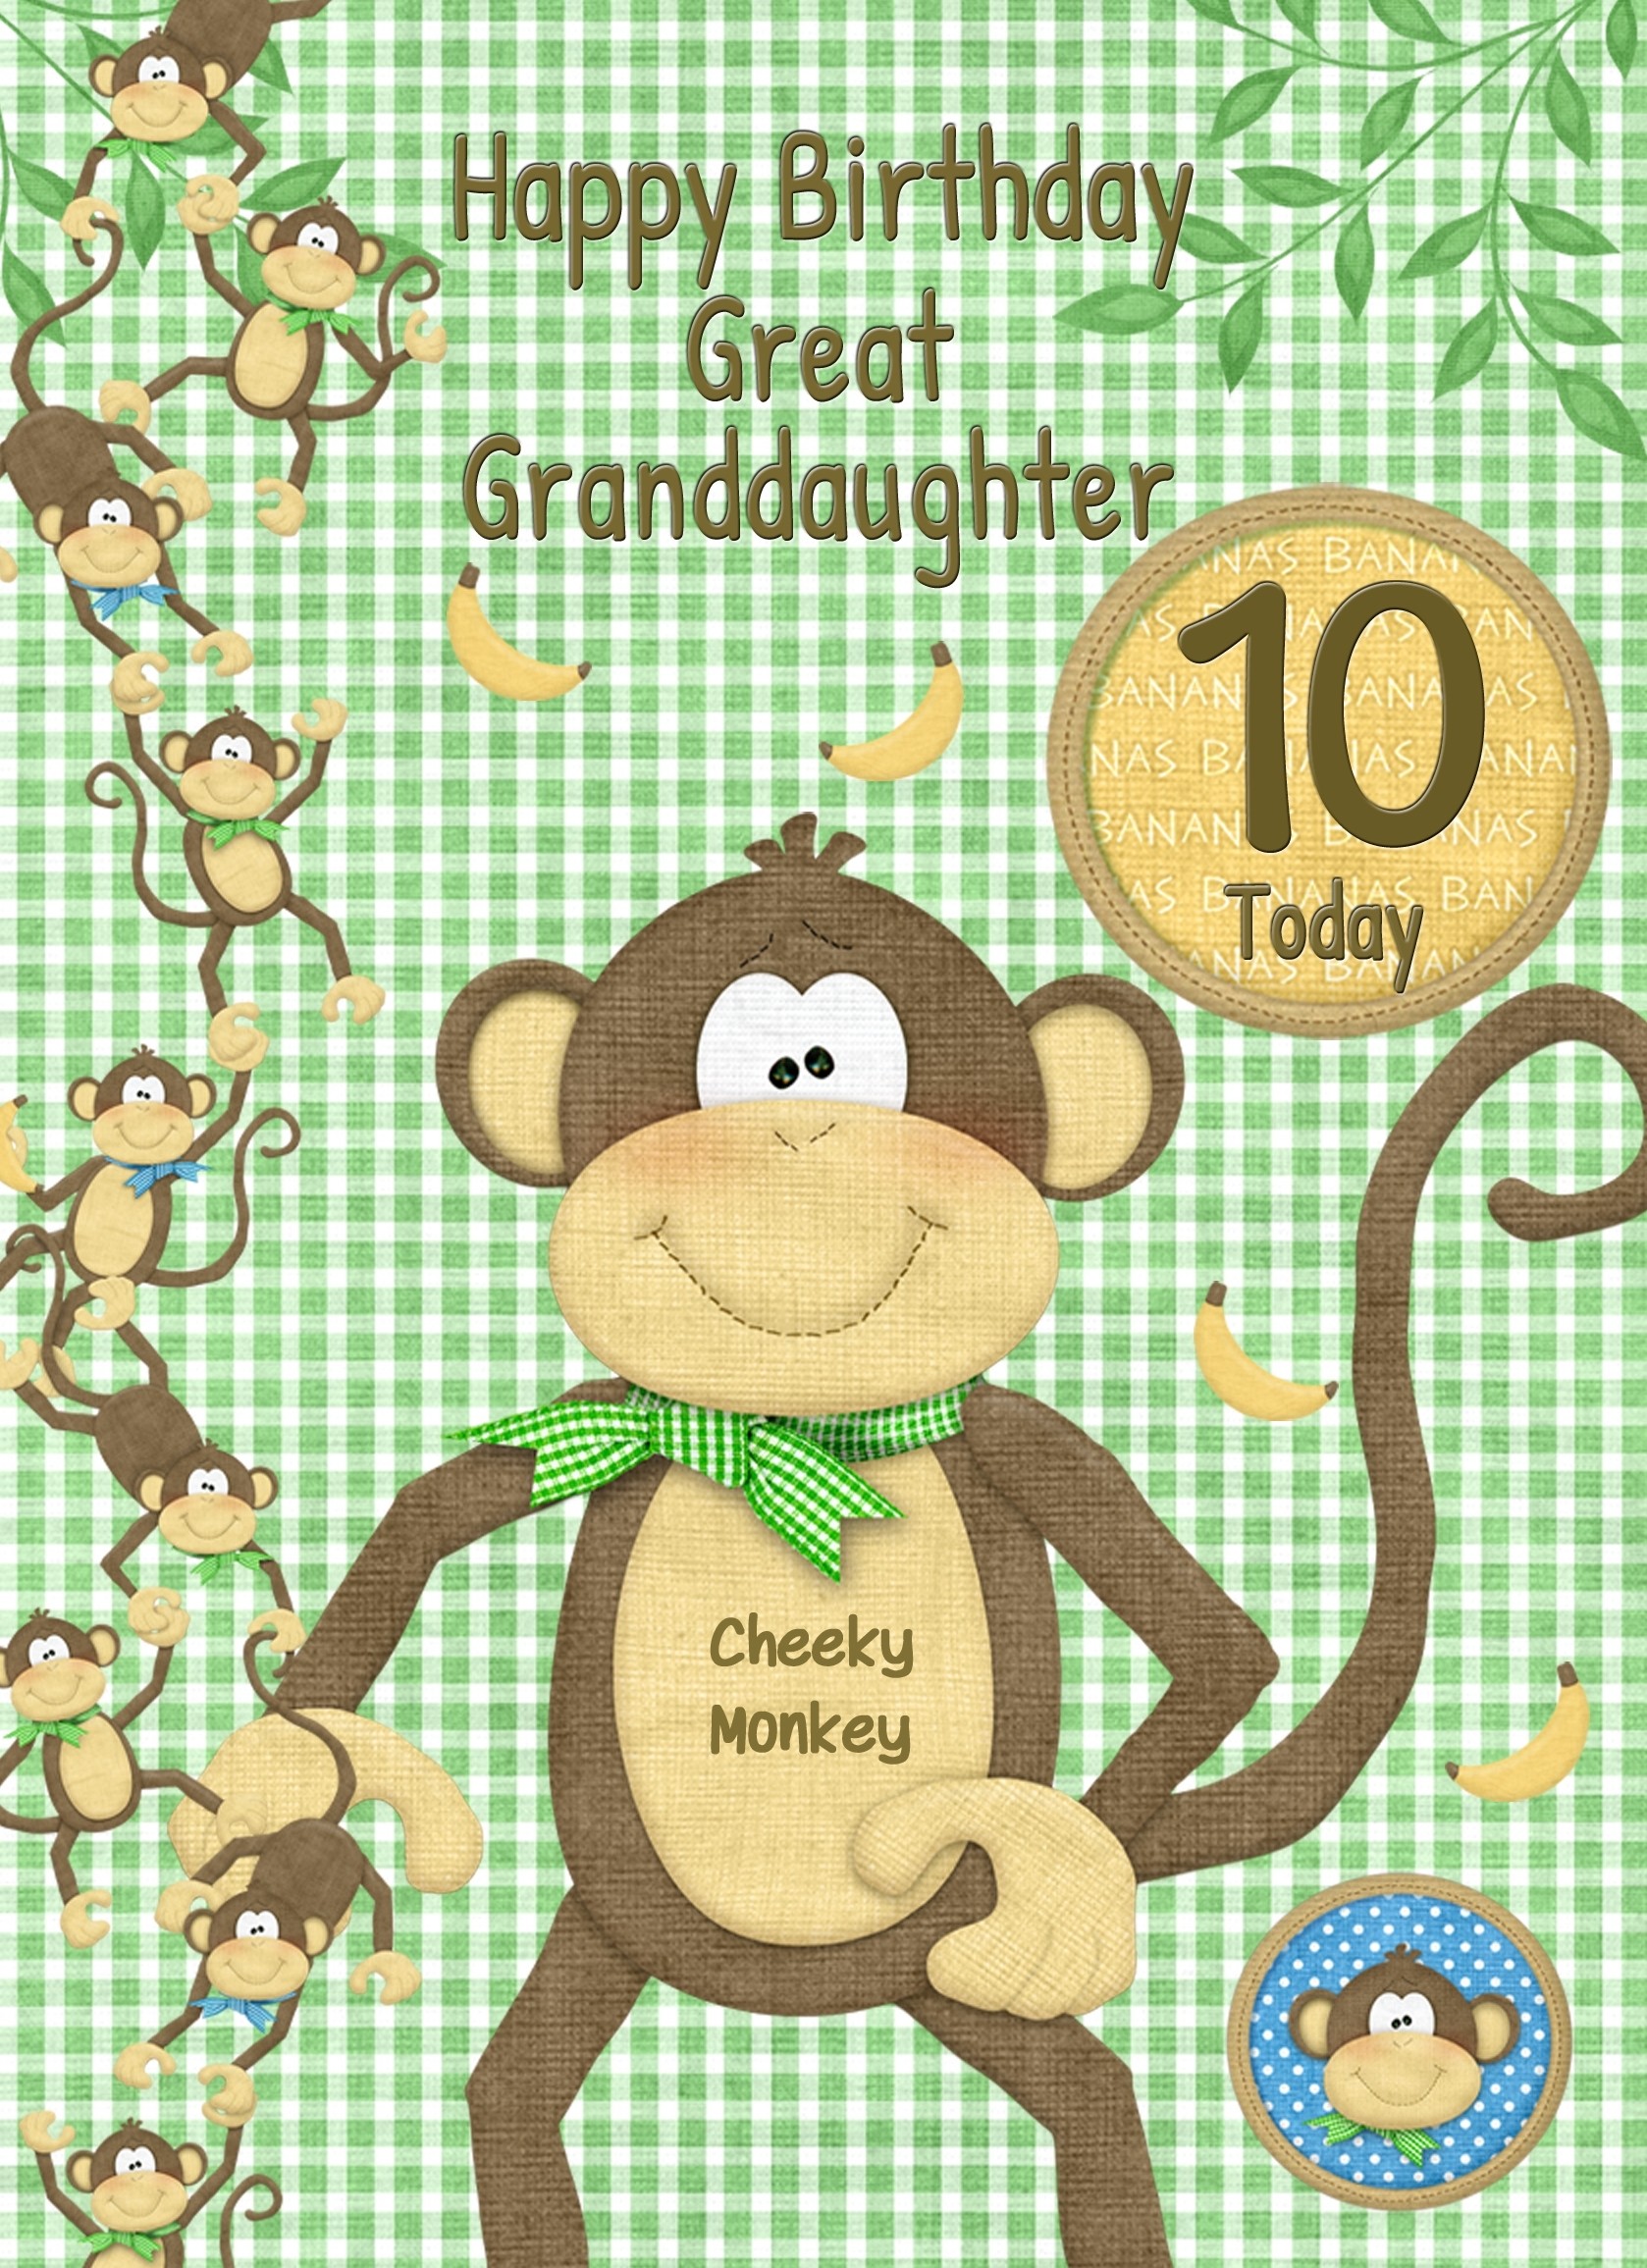 Kids 10th Birthday Cheeky Monkey Cartoon Card for Great Granddaughter